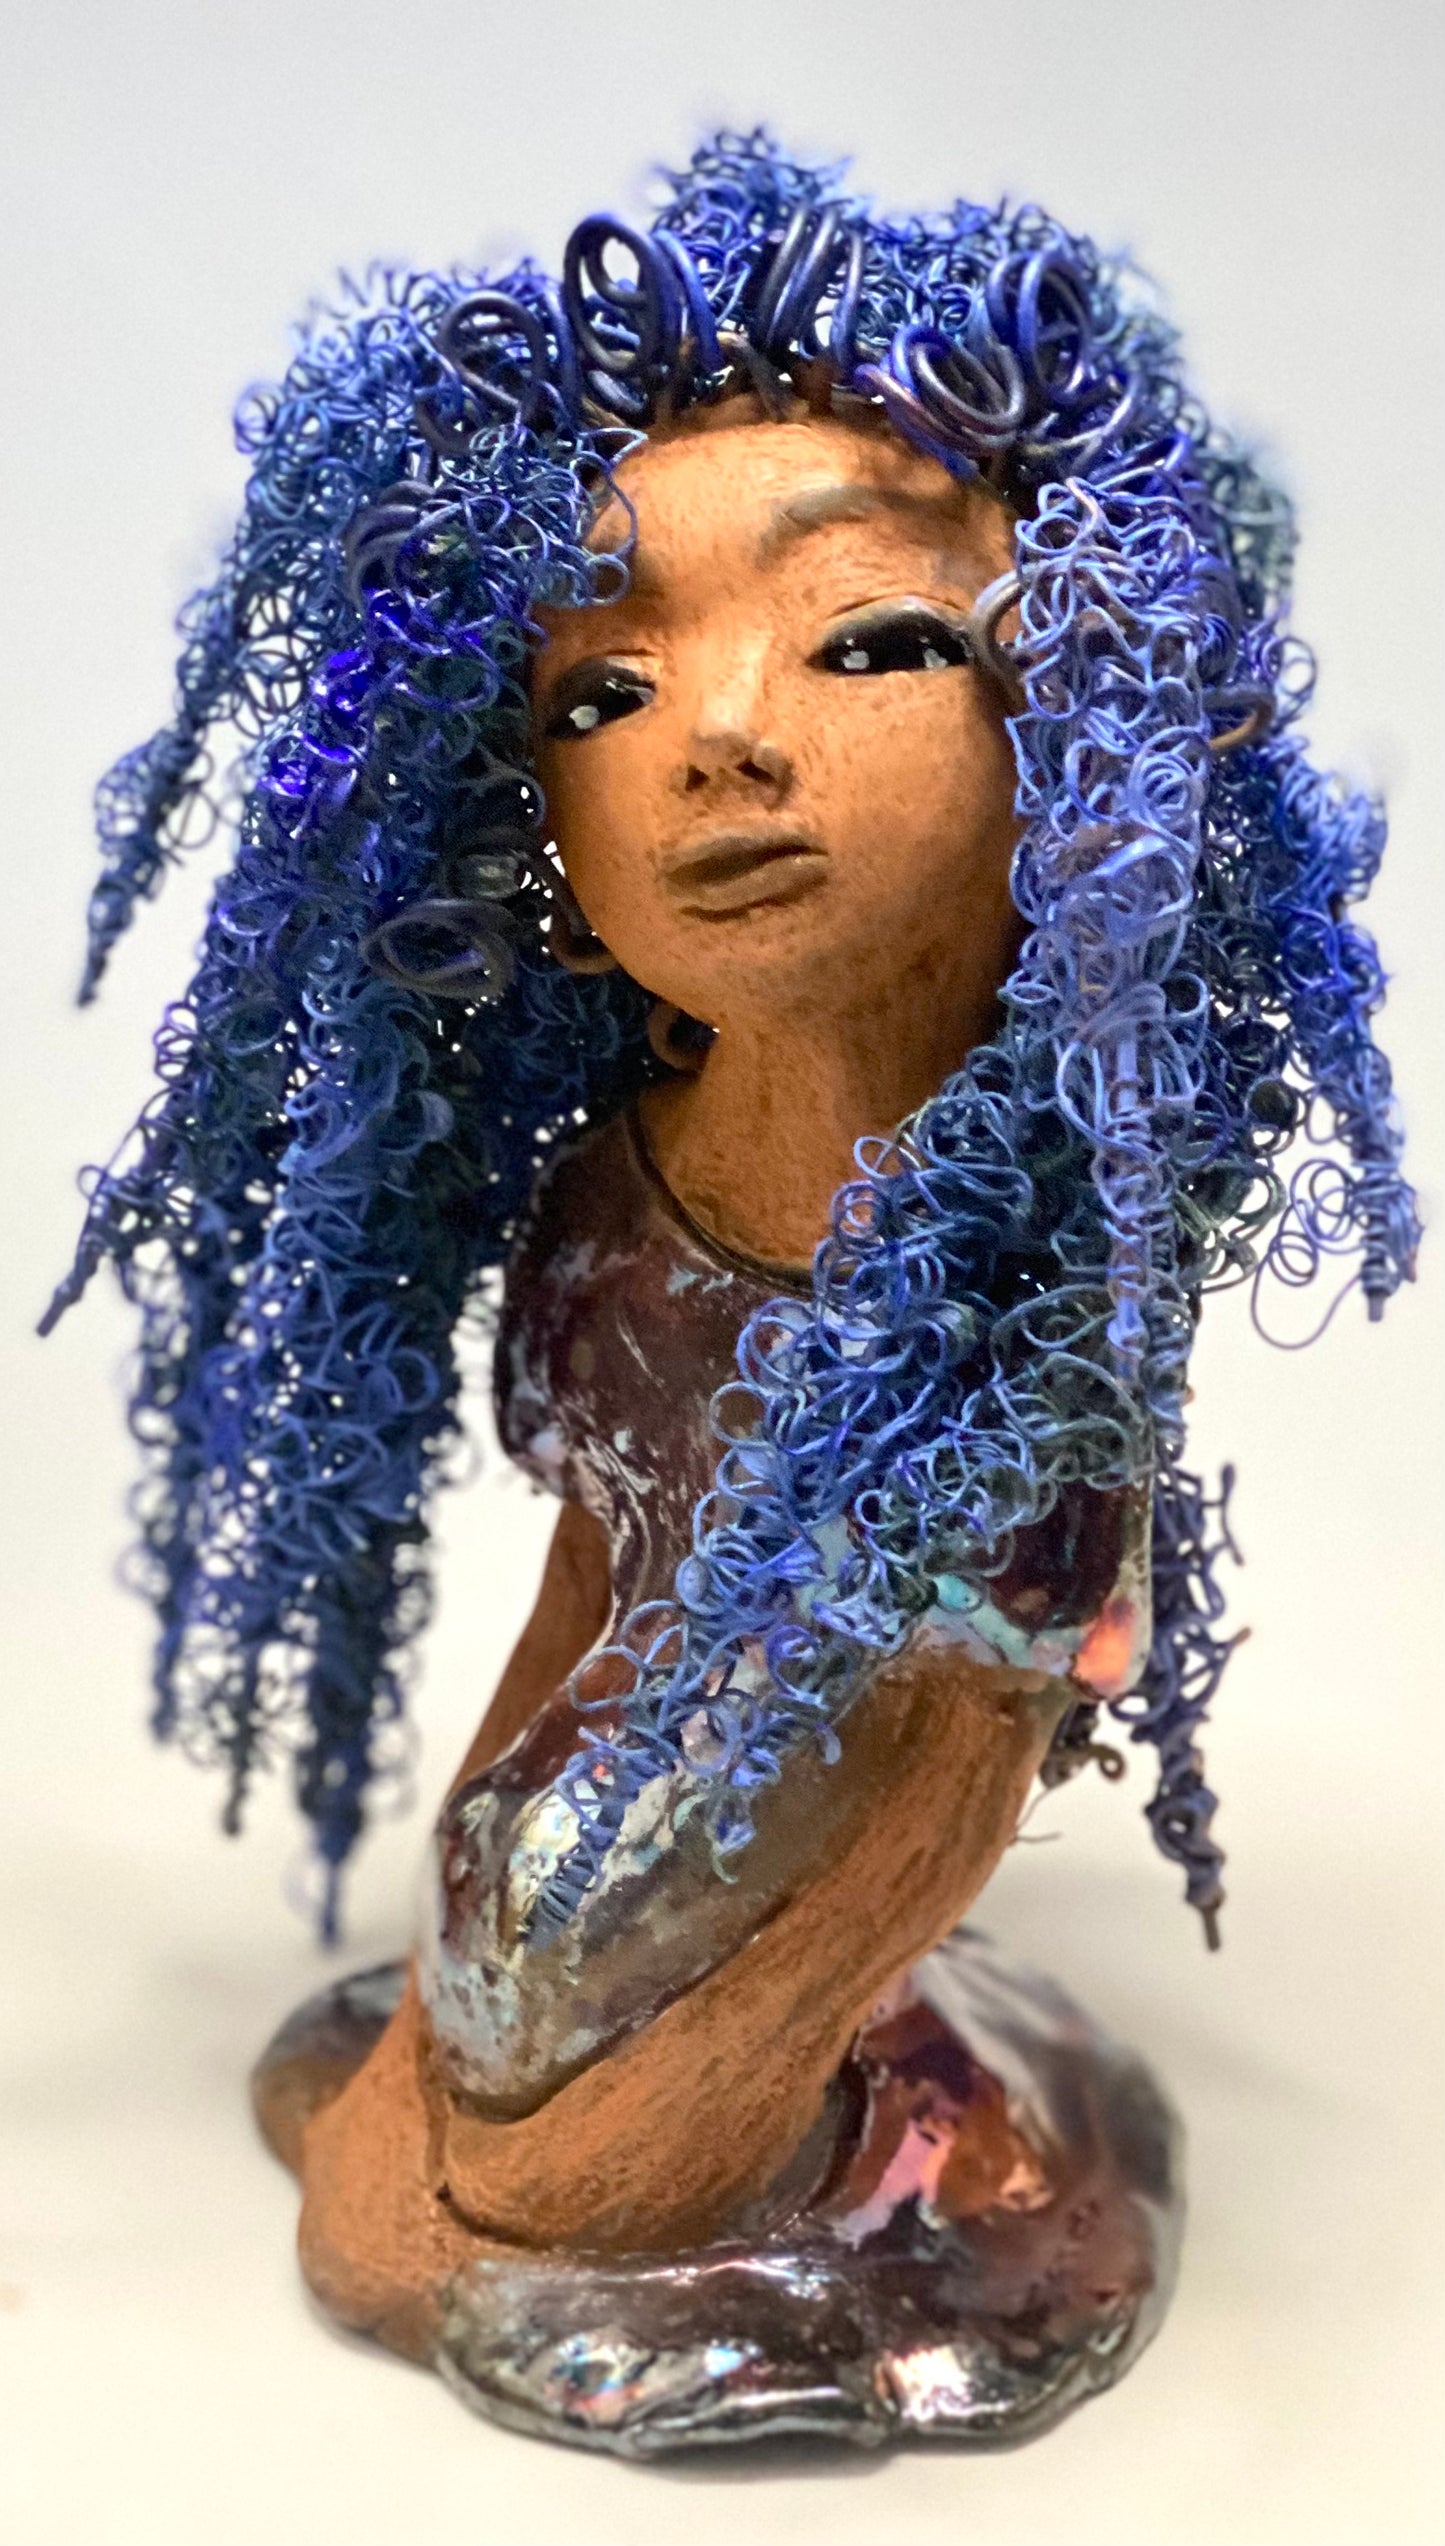 Rachel Rachel stands 8" x 6" x 5.5" and weighs 1.9 lbs. She has a lovely honey brown complexion with cocoa brown lips. She has long twisted wire locs hairstyle waist down!  Rachel has a very colorful metallic  copper blue antique glazed dress. She has over 75 feet of 16 and 24 gauge  wire for hair. It took over 6 hours just to do her hair! With  eyes wide opened, Rachel has hope of finding a new home.  